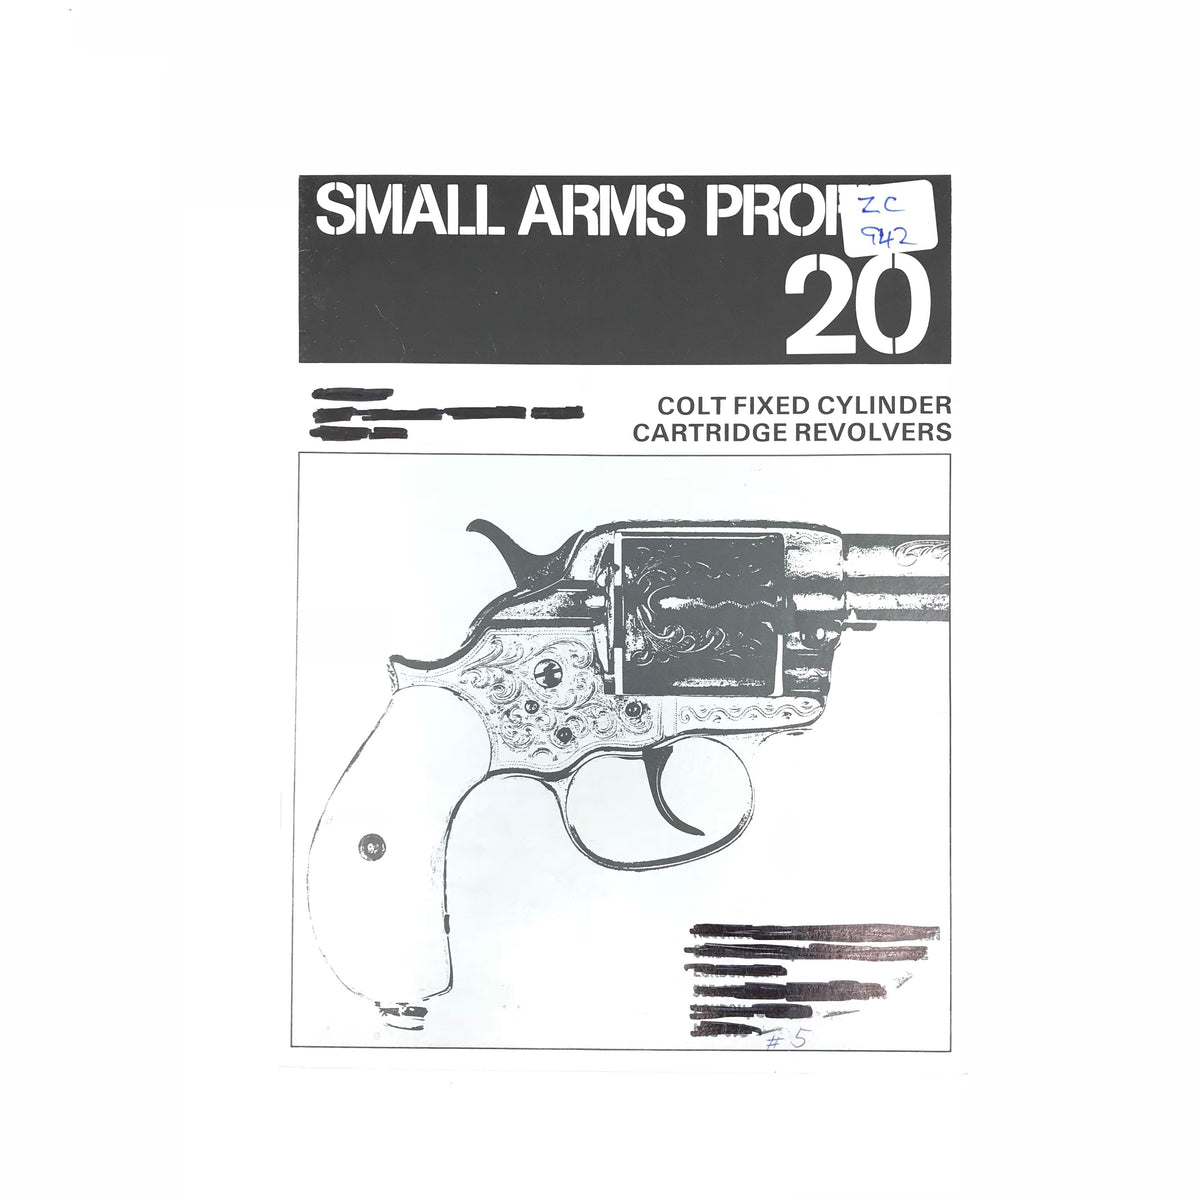 Small Arms Profile 20 Colt Fixed Cylinders Cartridge Revolvers